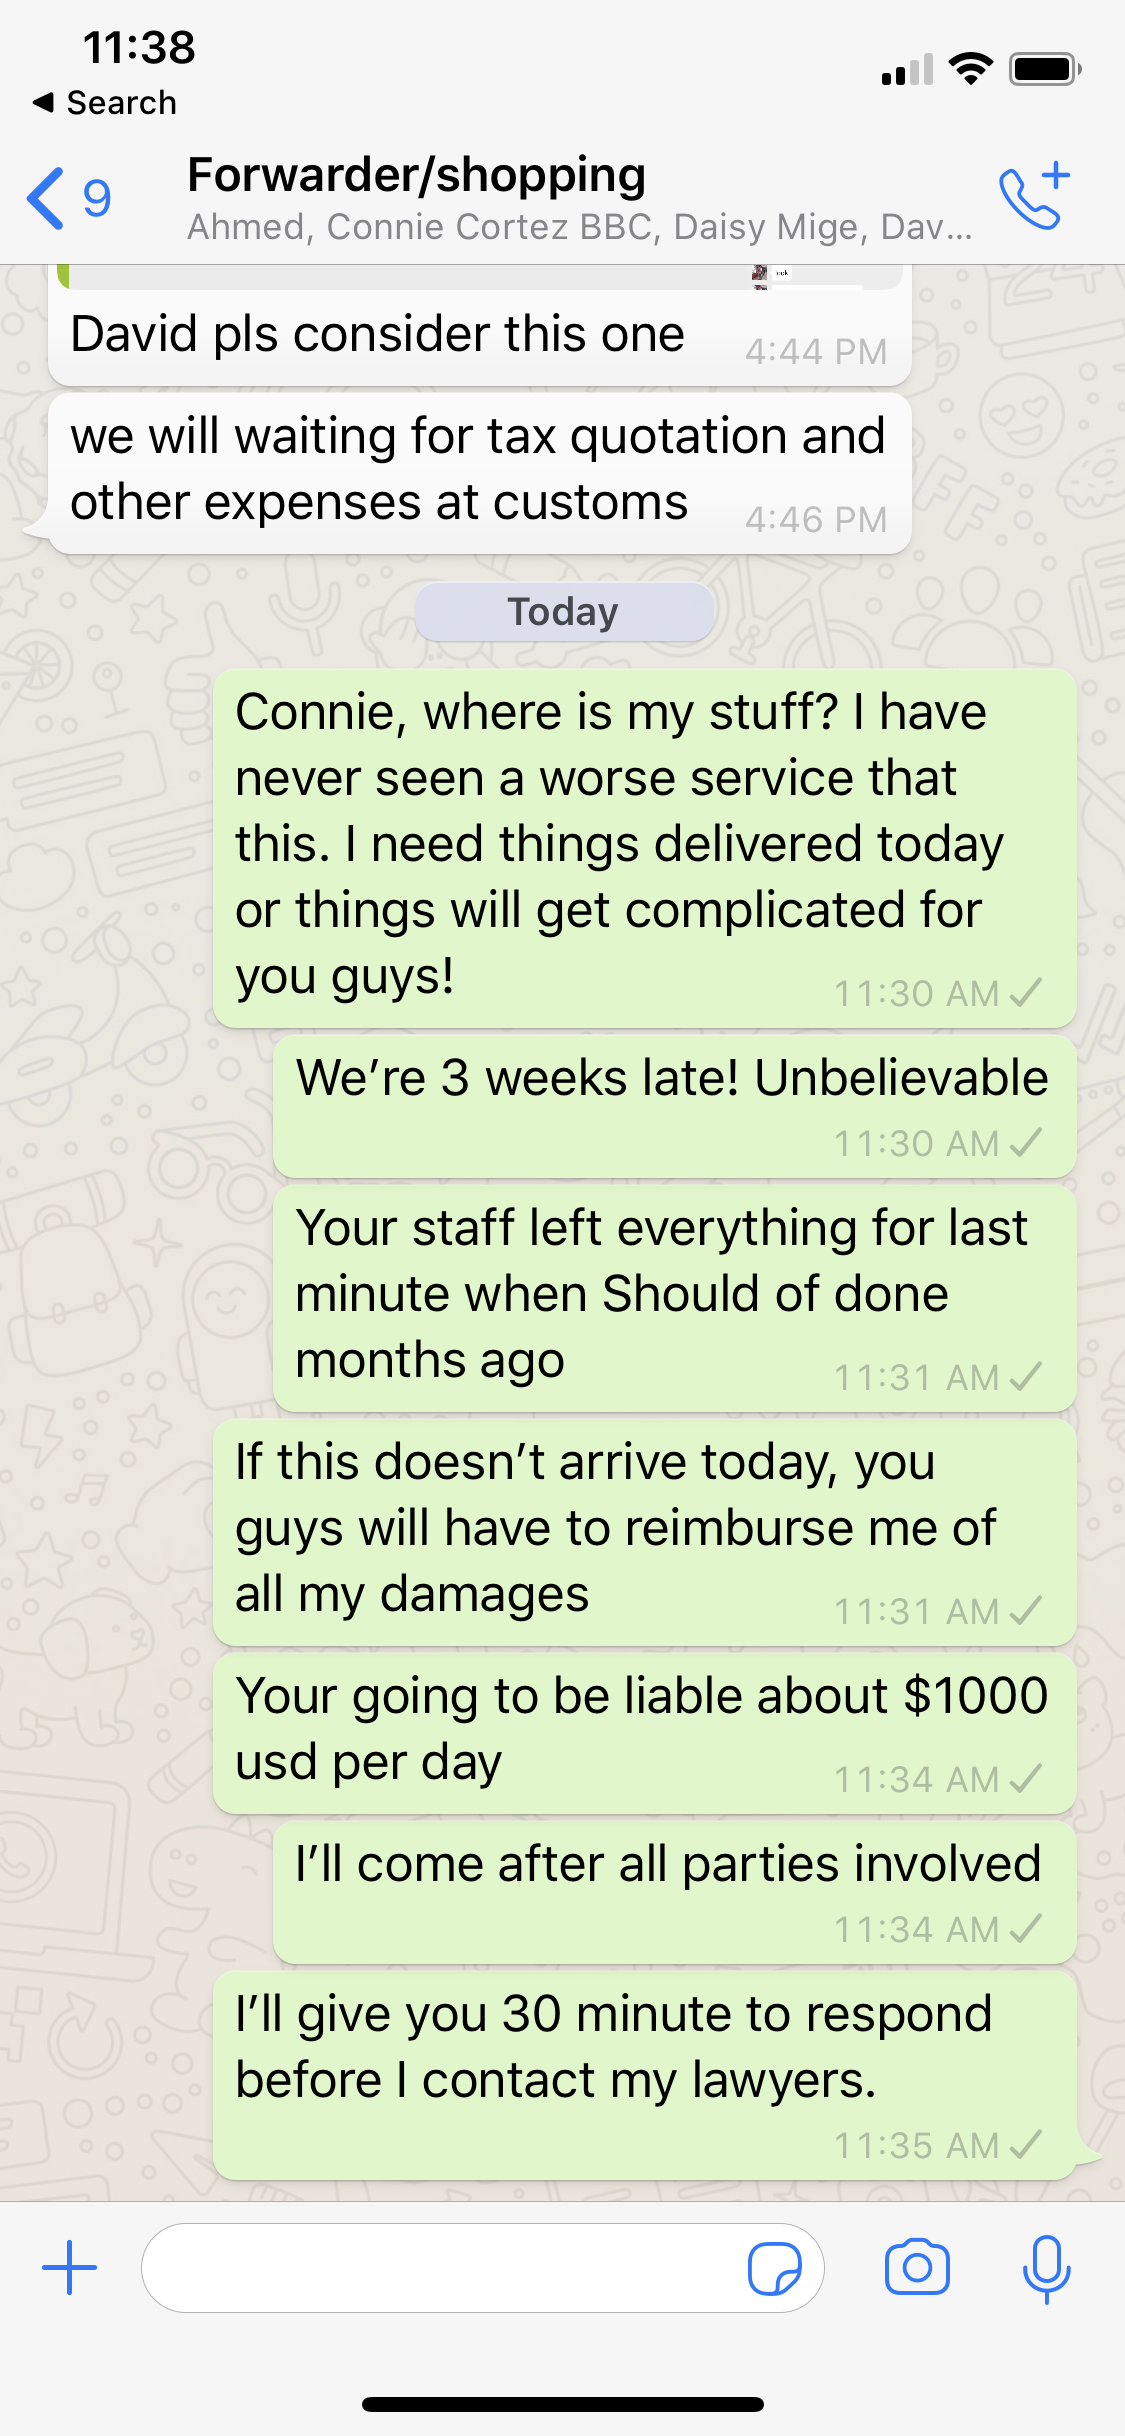  MY MESSAGES TO CONNIE SCAMMER